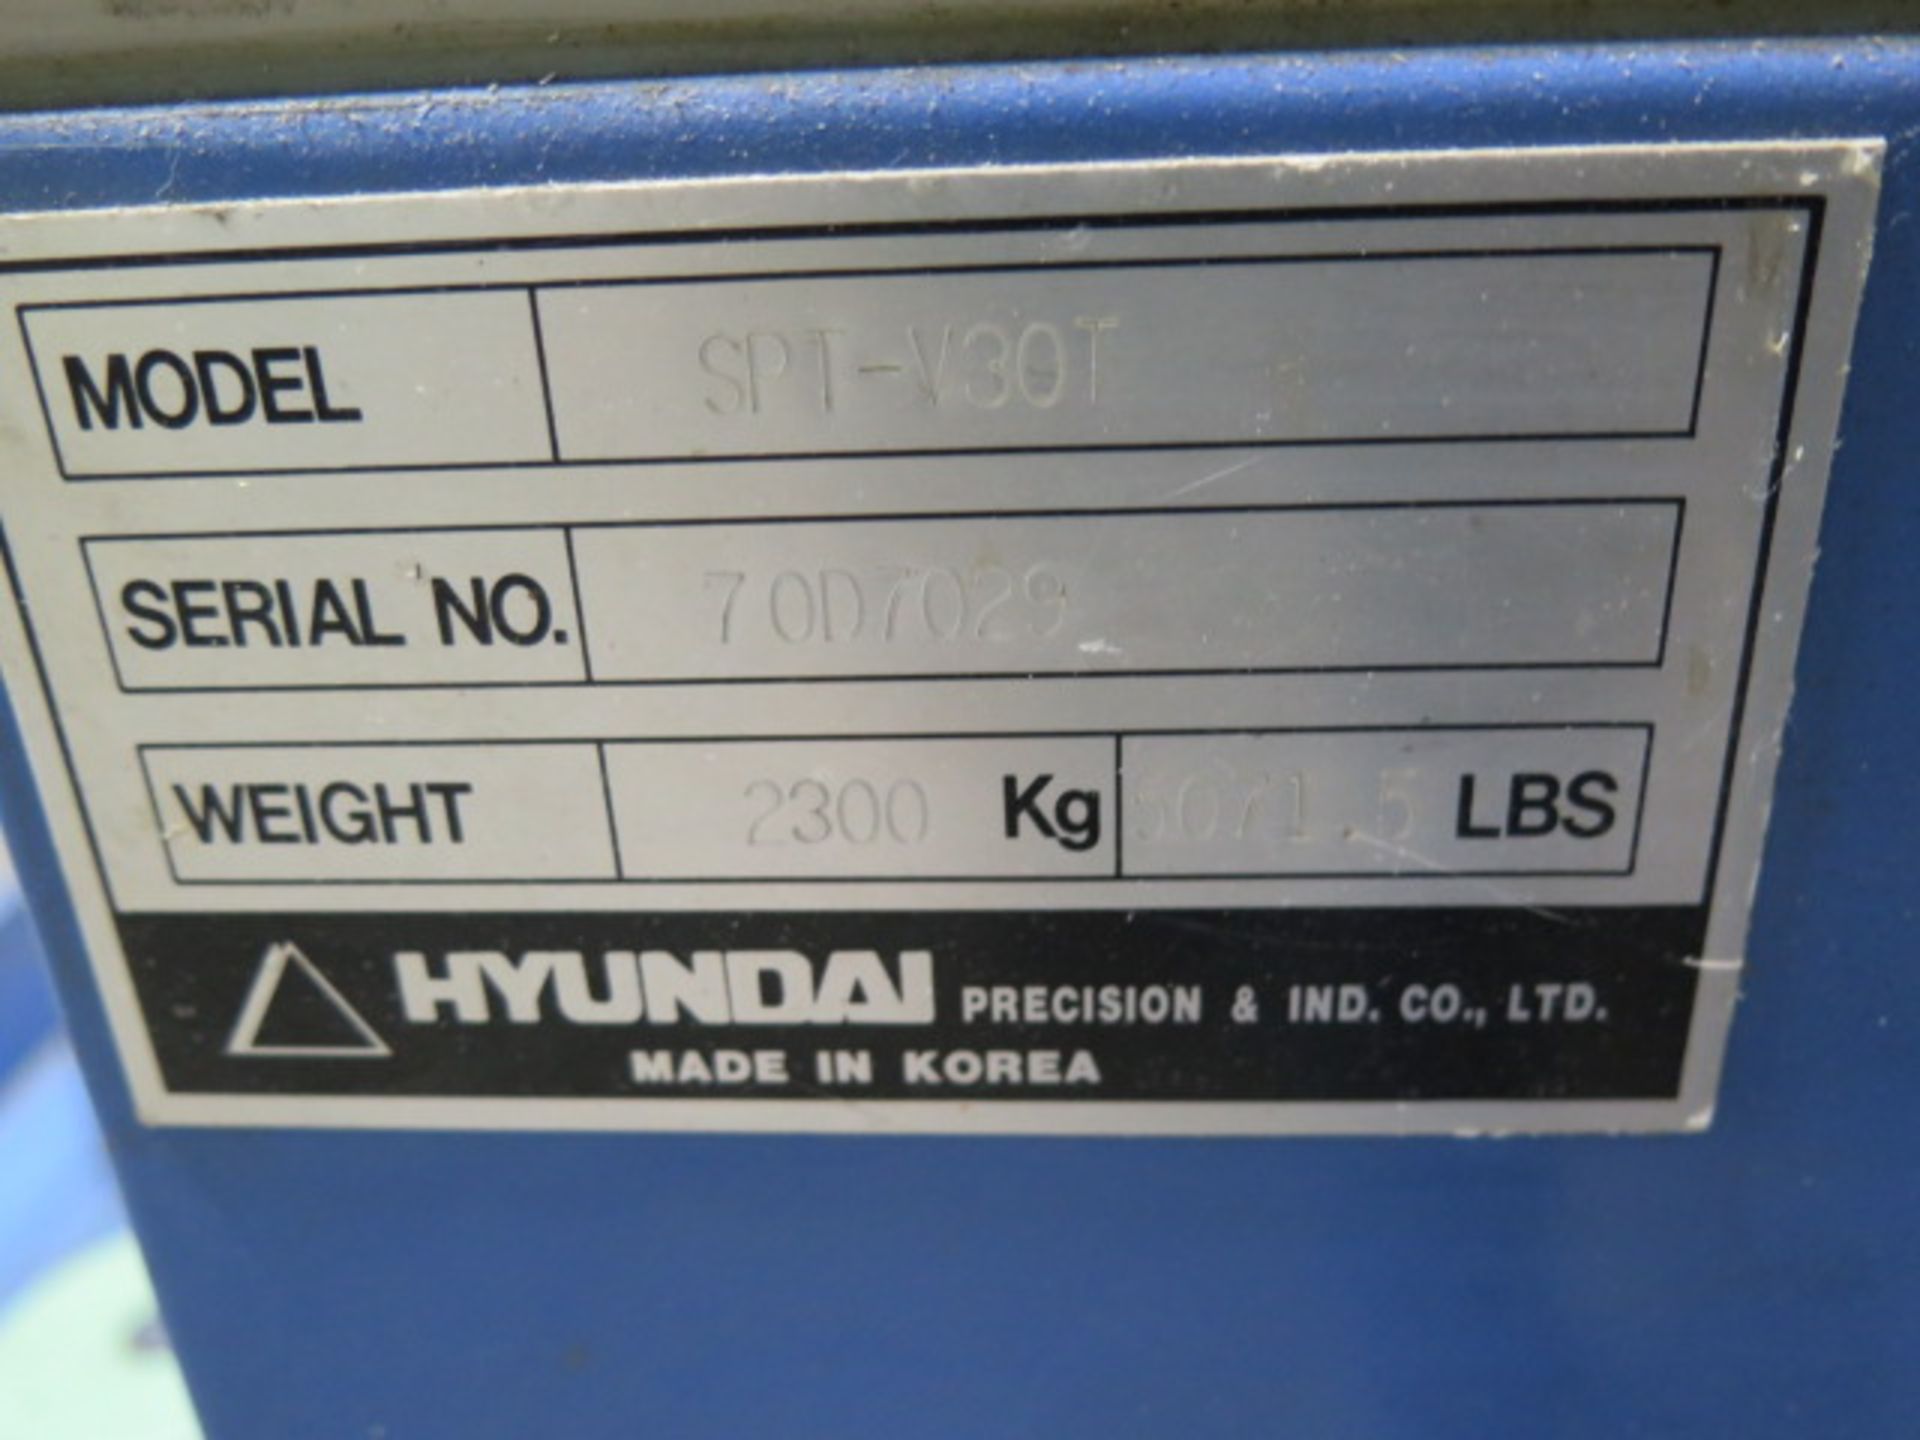 Hyundai SPT-V30T CNC Drilling and Tapping Center s/n 70D7029 w/ Yasnac MX3 SOLD AS IS - Image 16 of 16